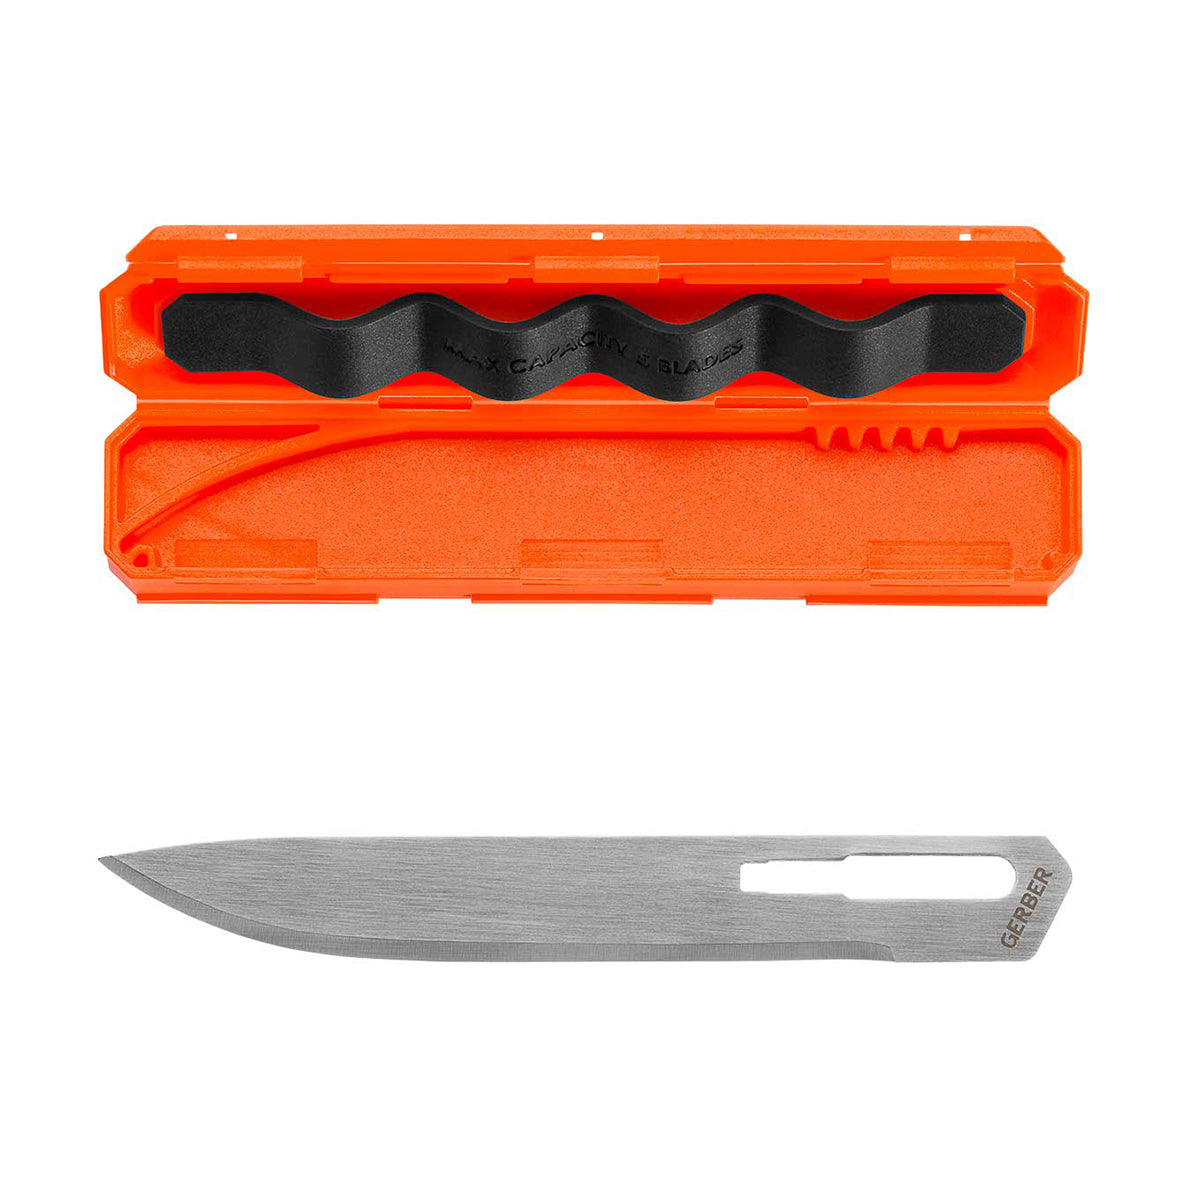 Gerber Vital Big Game Drop Point Replacement Blades - 5 Pack by Gerber | Gear - goHUNT Shop